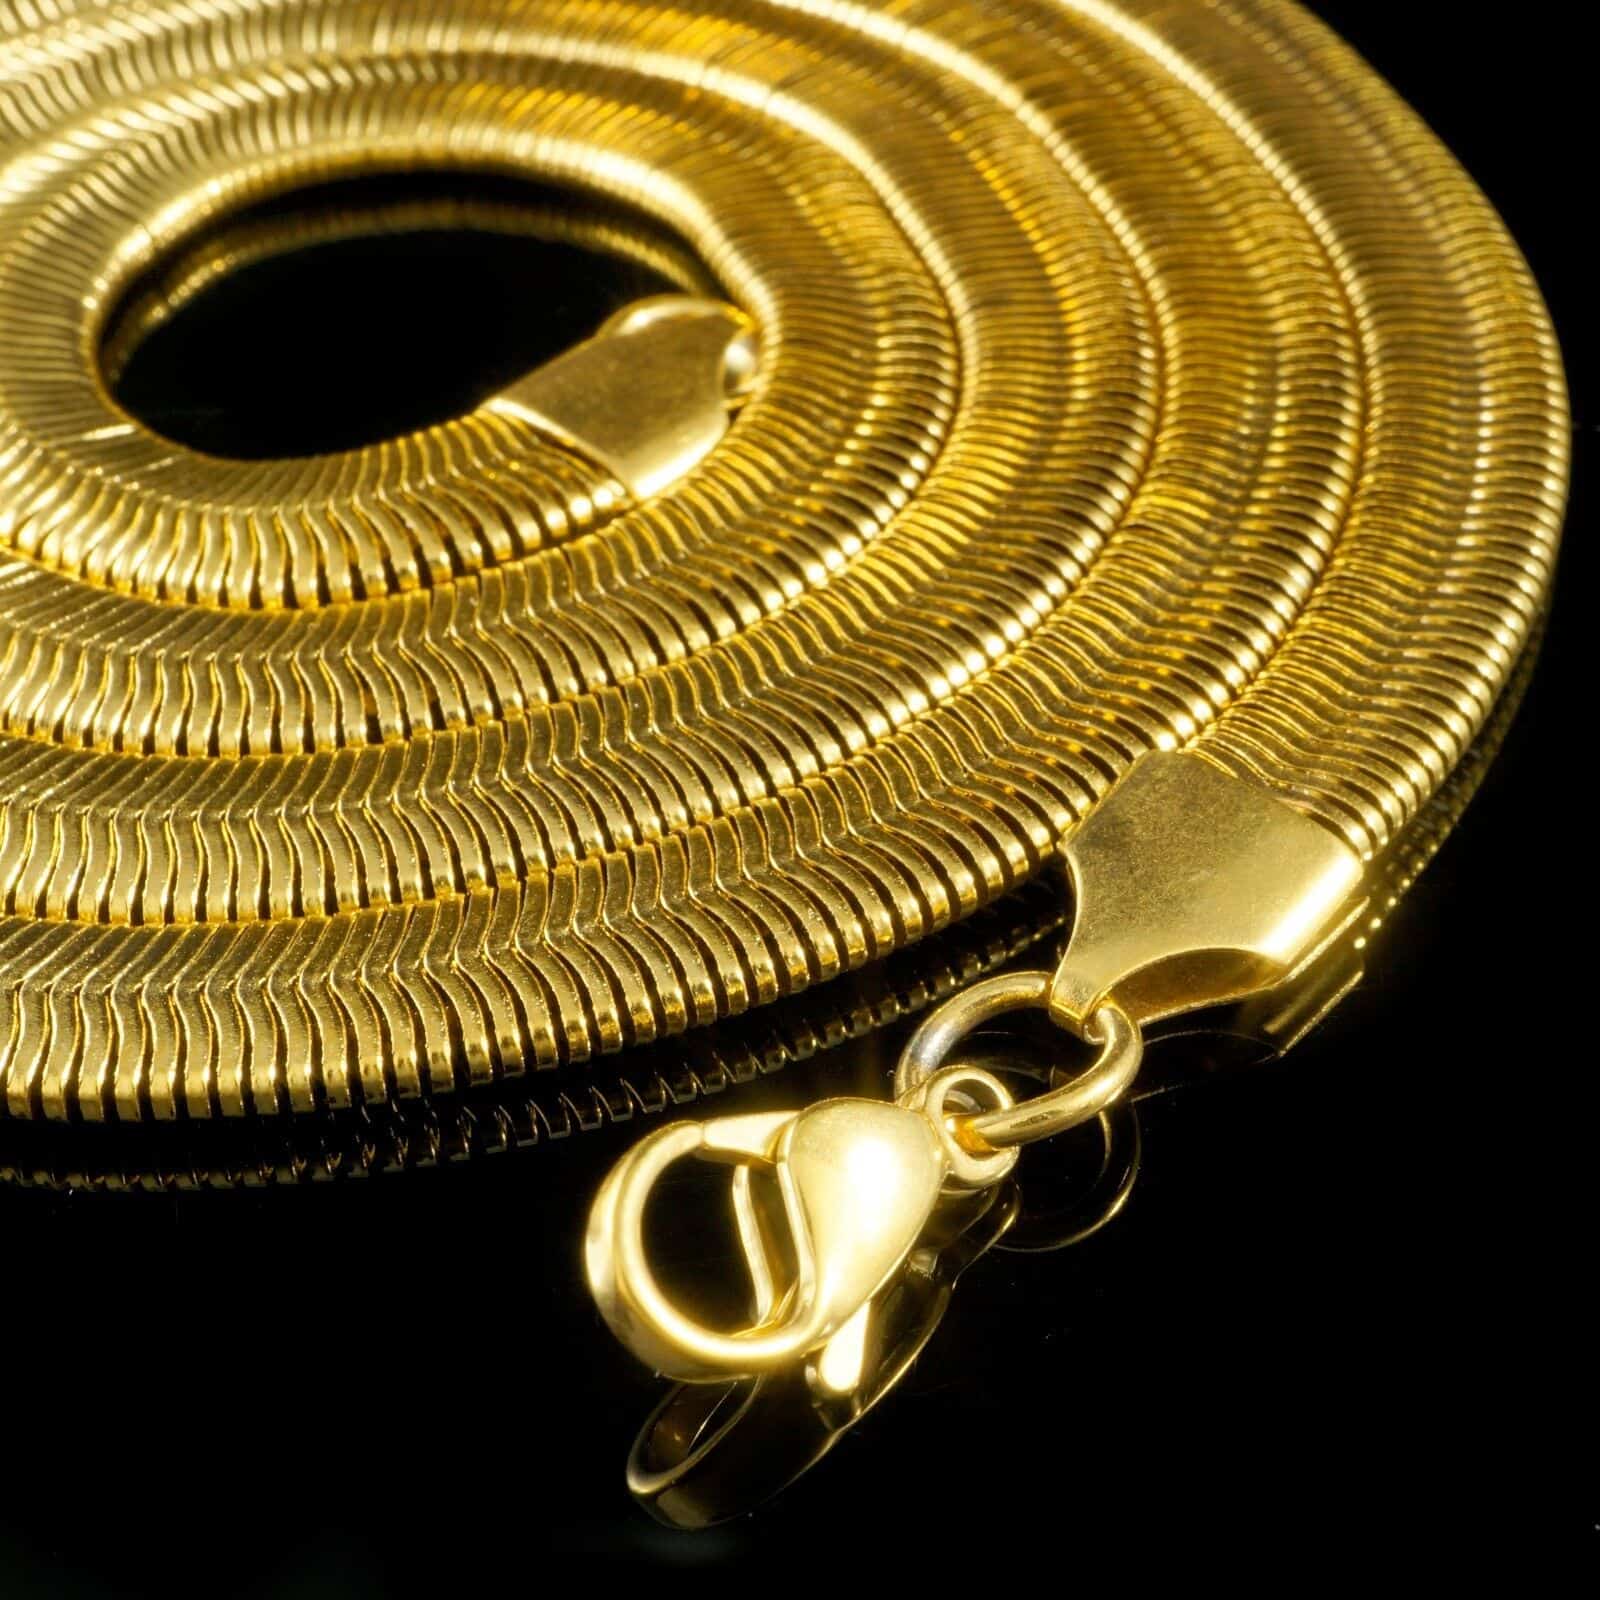 A gold plated snake chain on a black background.